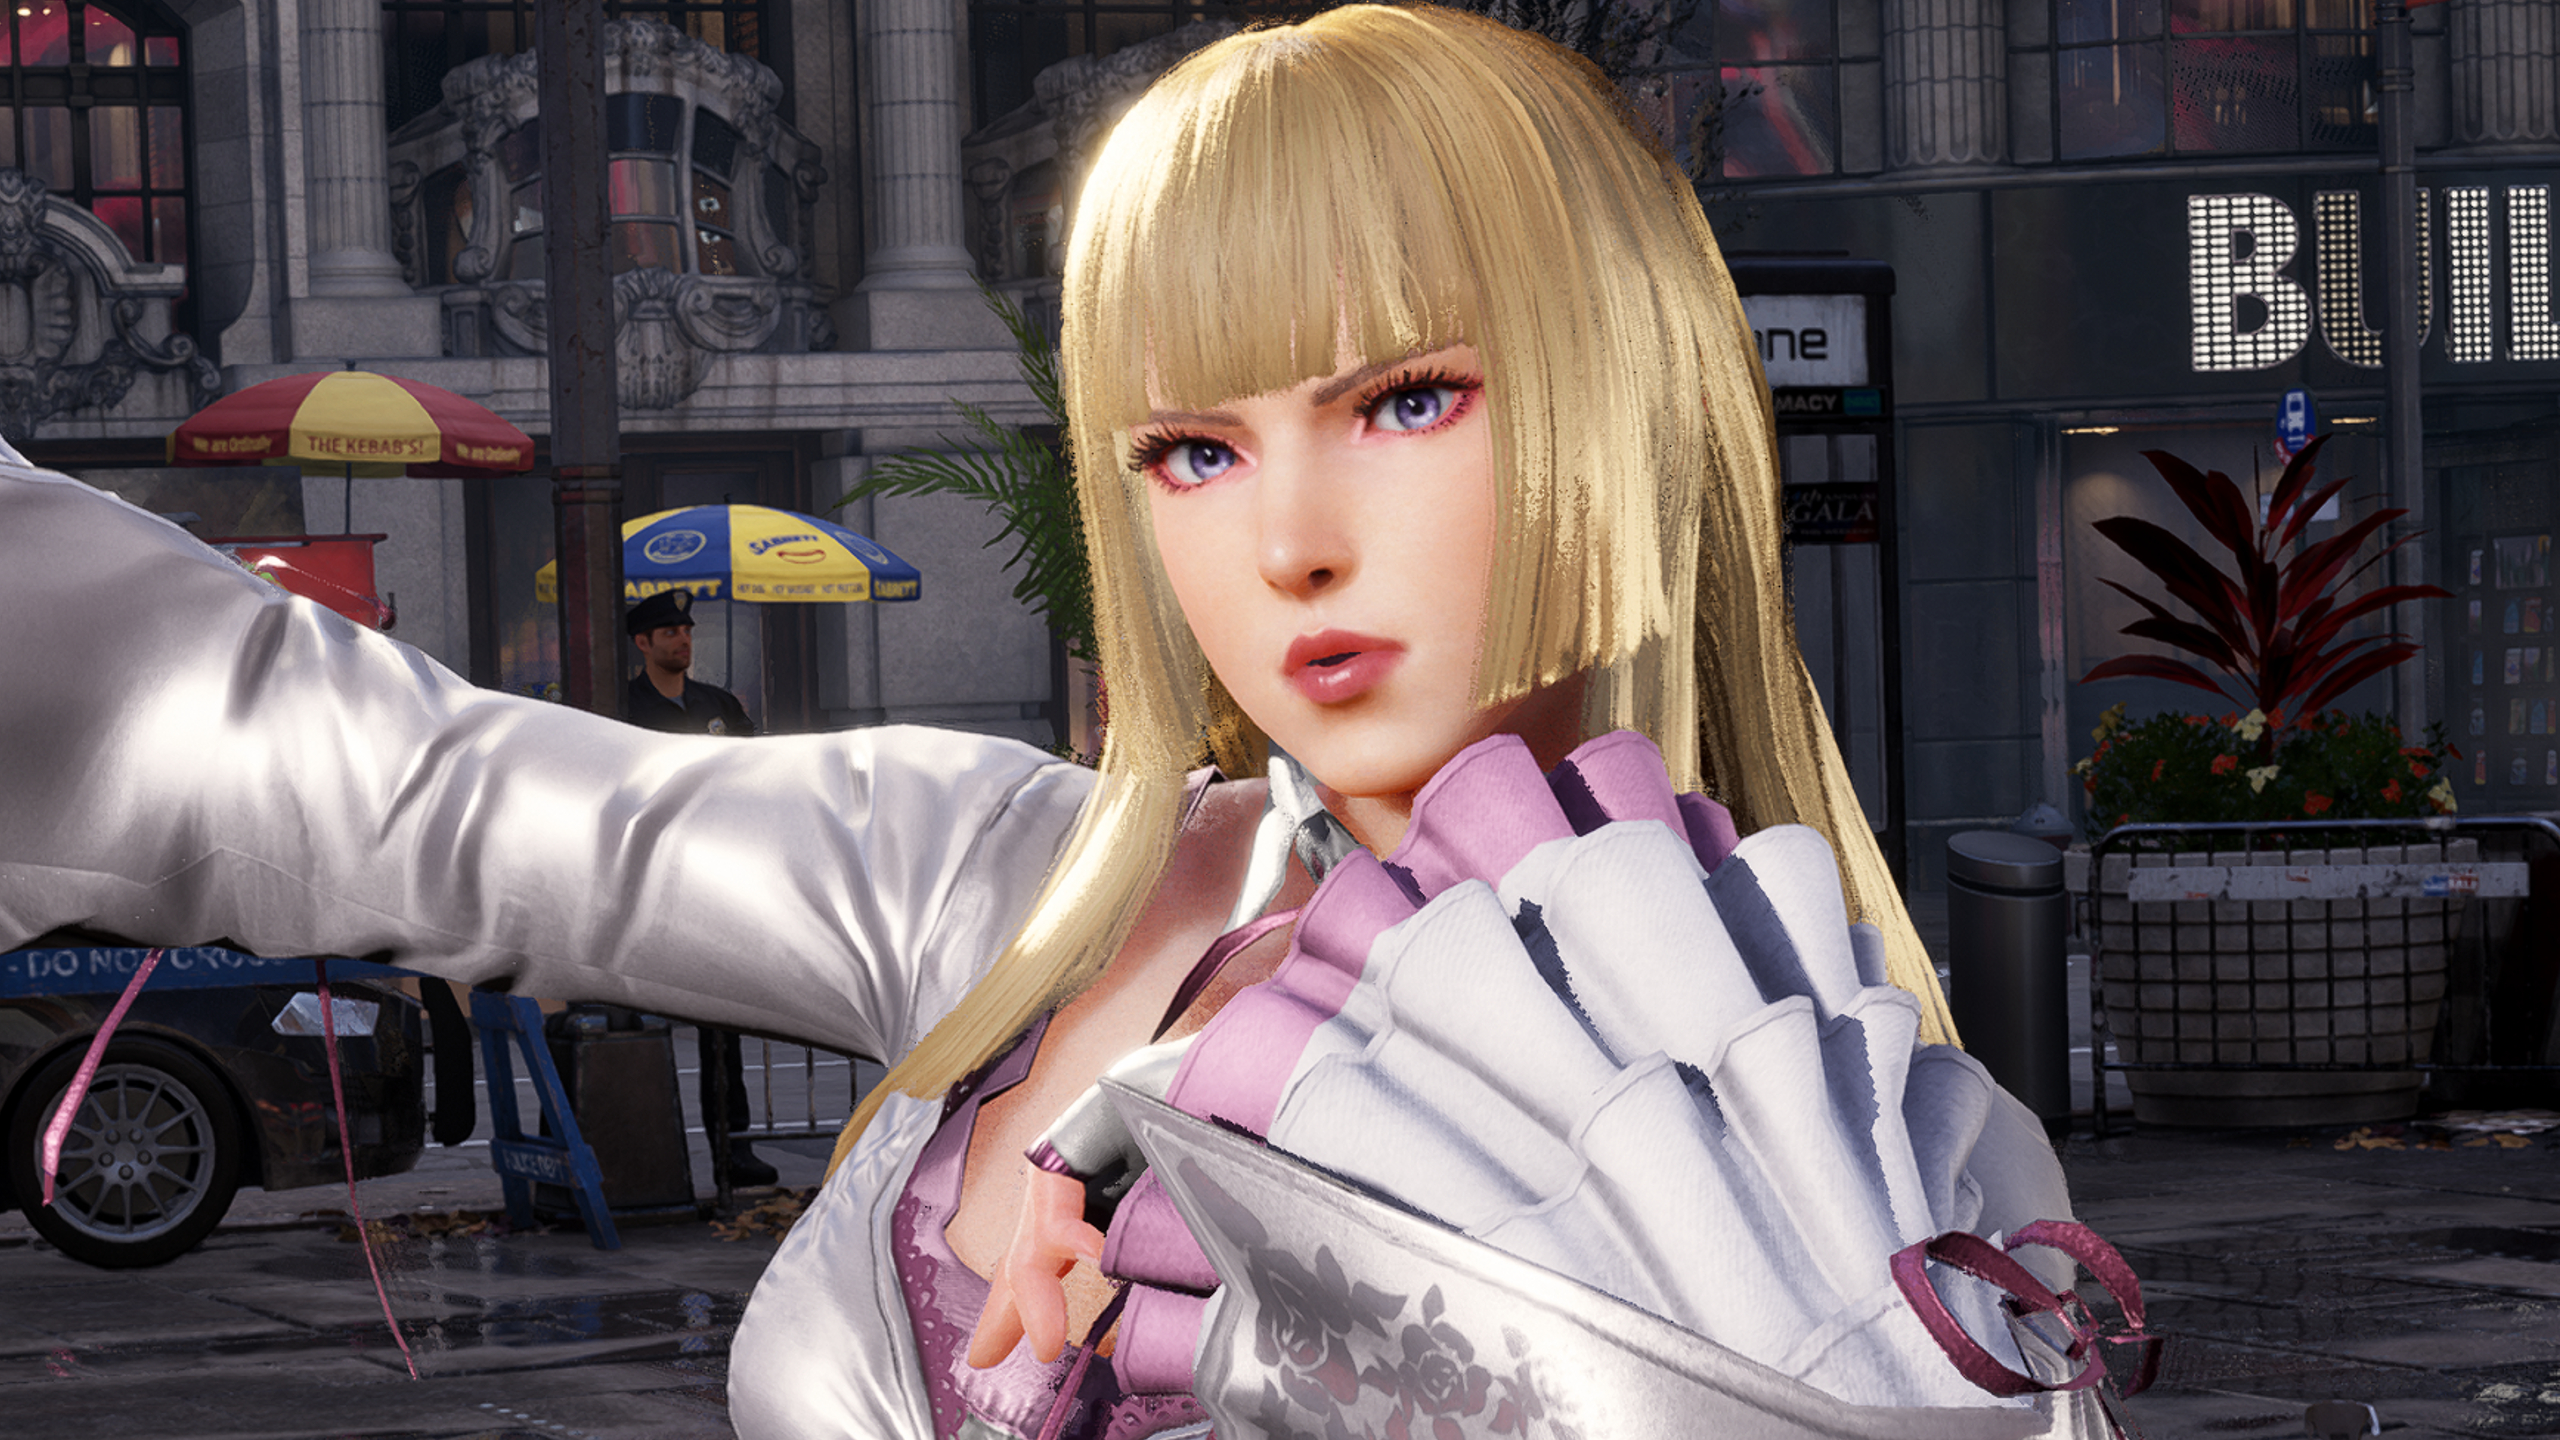  Tekken 8's newest cash shop skin commits the cardinal sin of forgetting Lili's skirt lace, Harada reassures fans he'll 'request a fix from the costume team' for his wrongdoings 